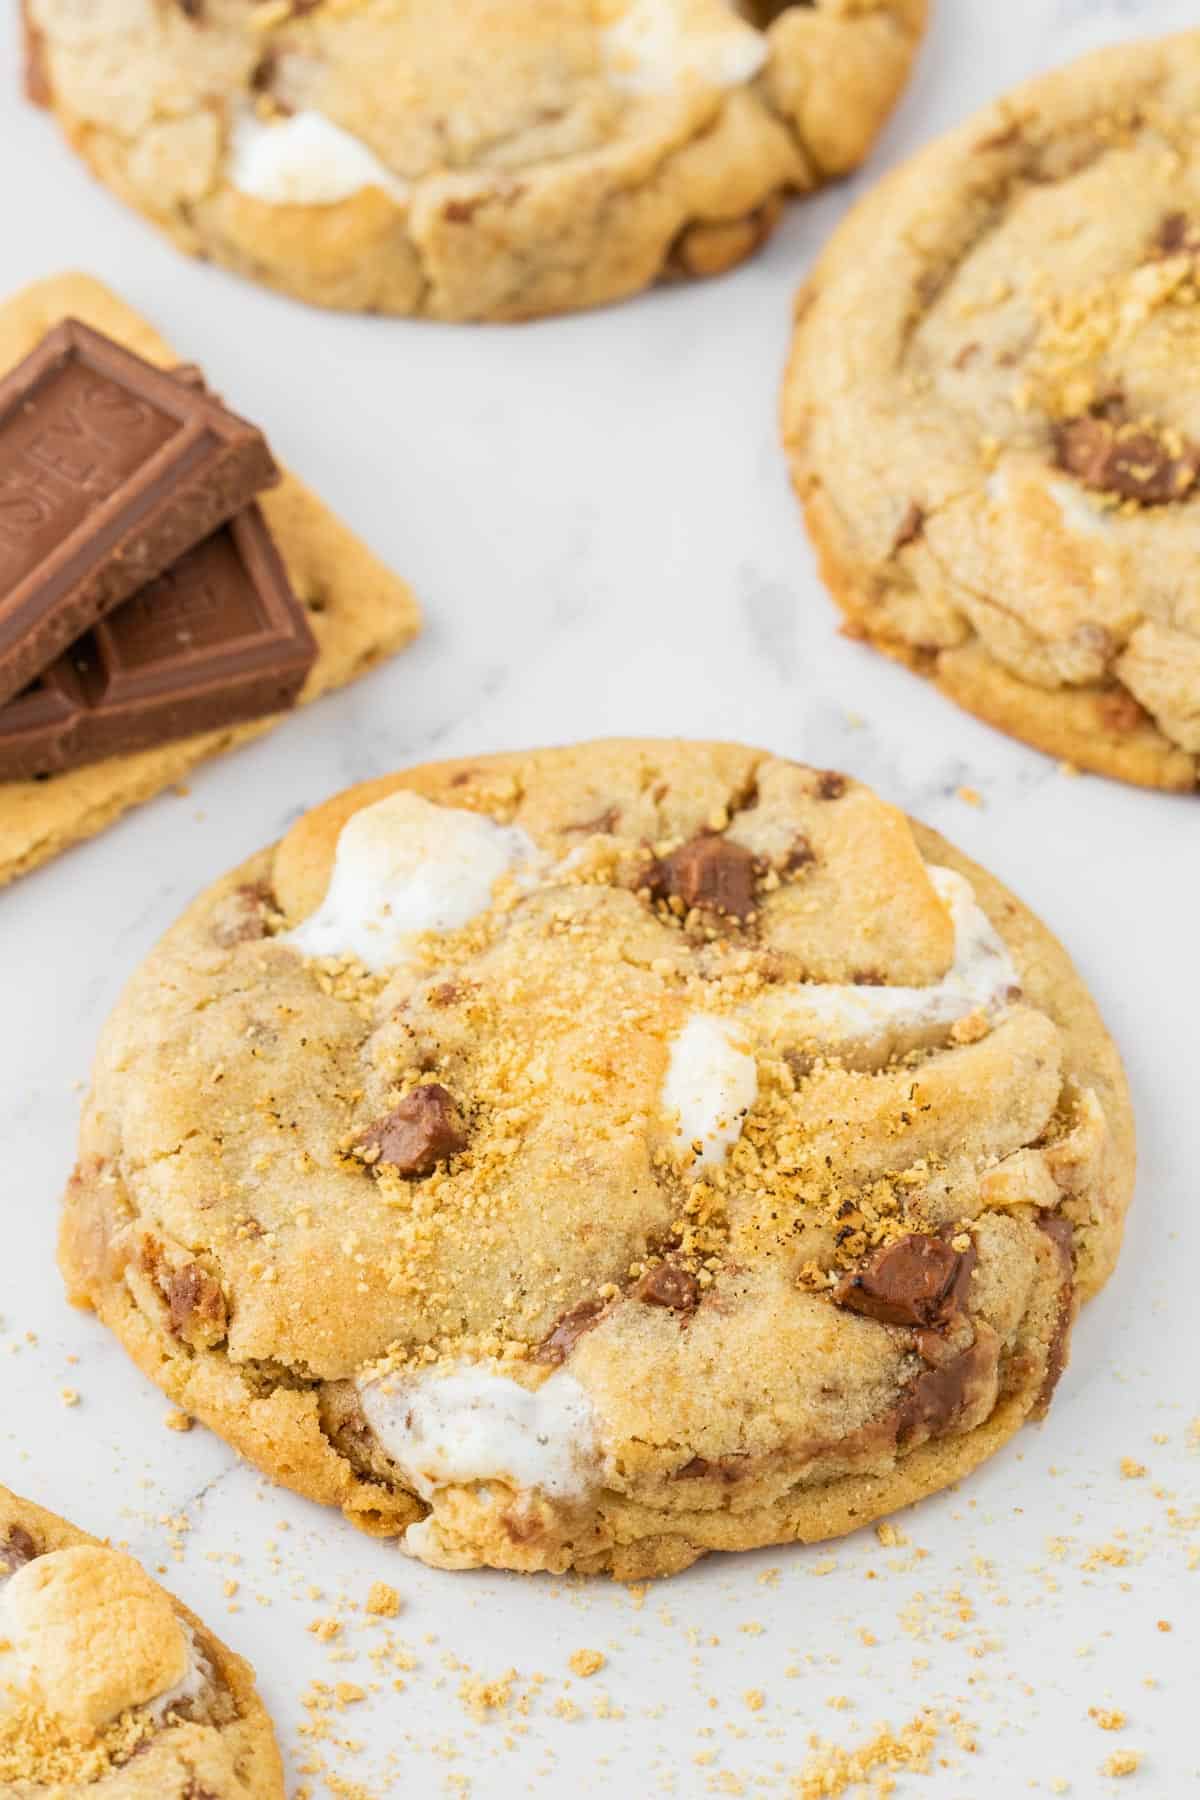 smores cookies arranged by a graham cracker with hershey bar pieces on top of it